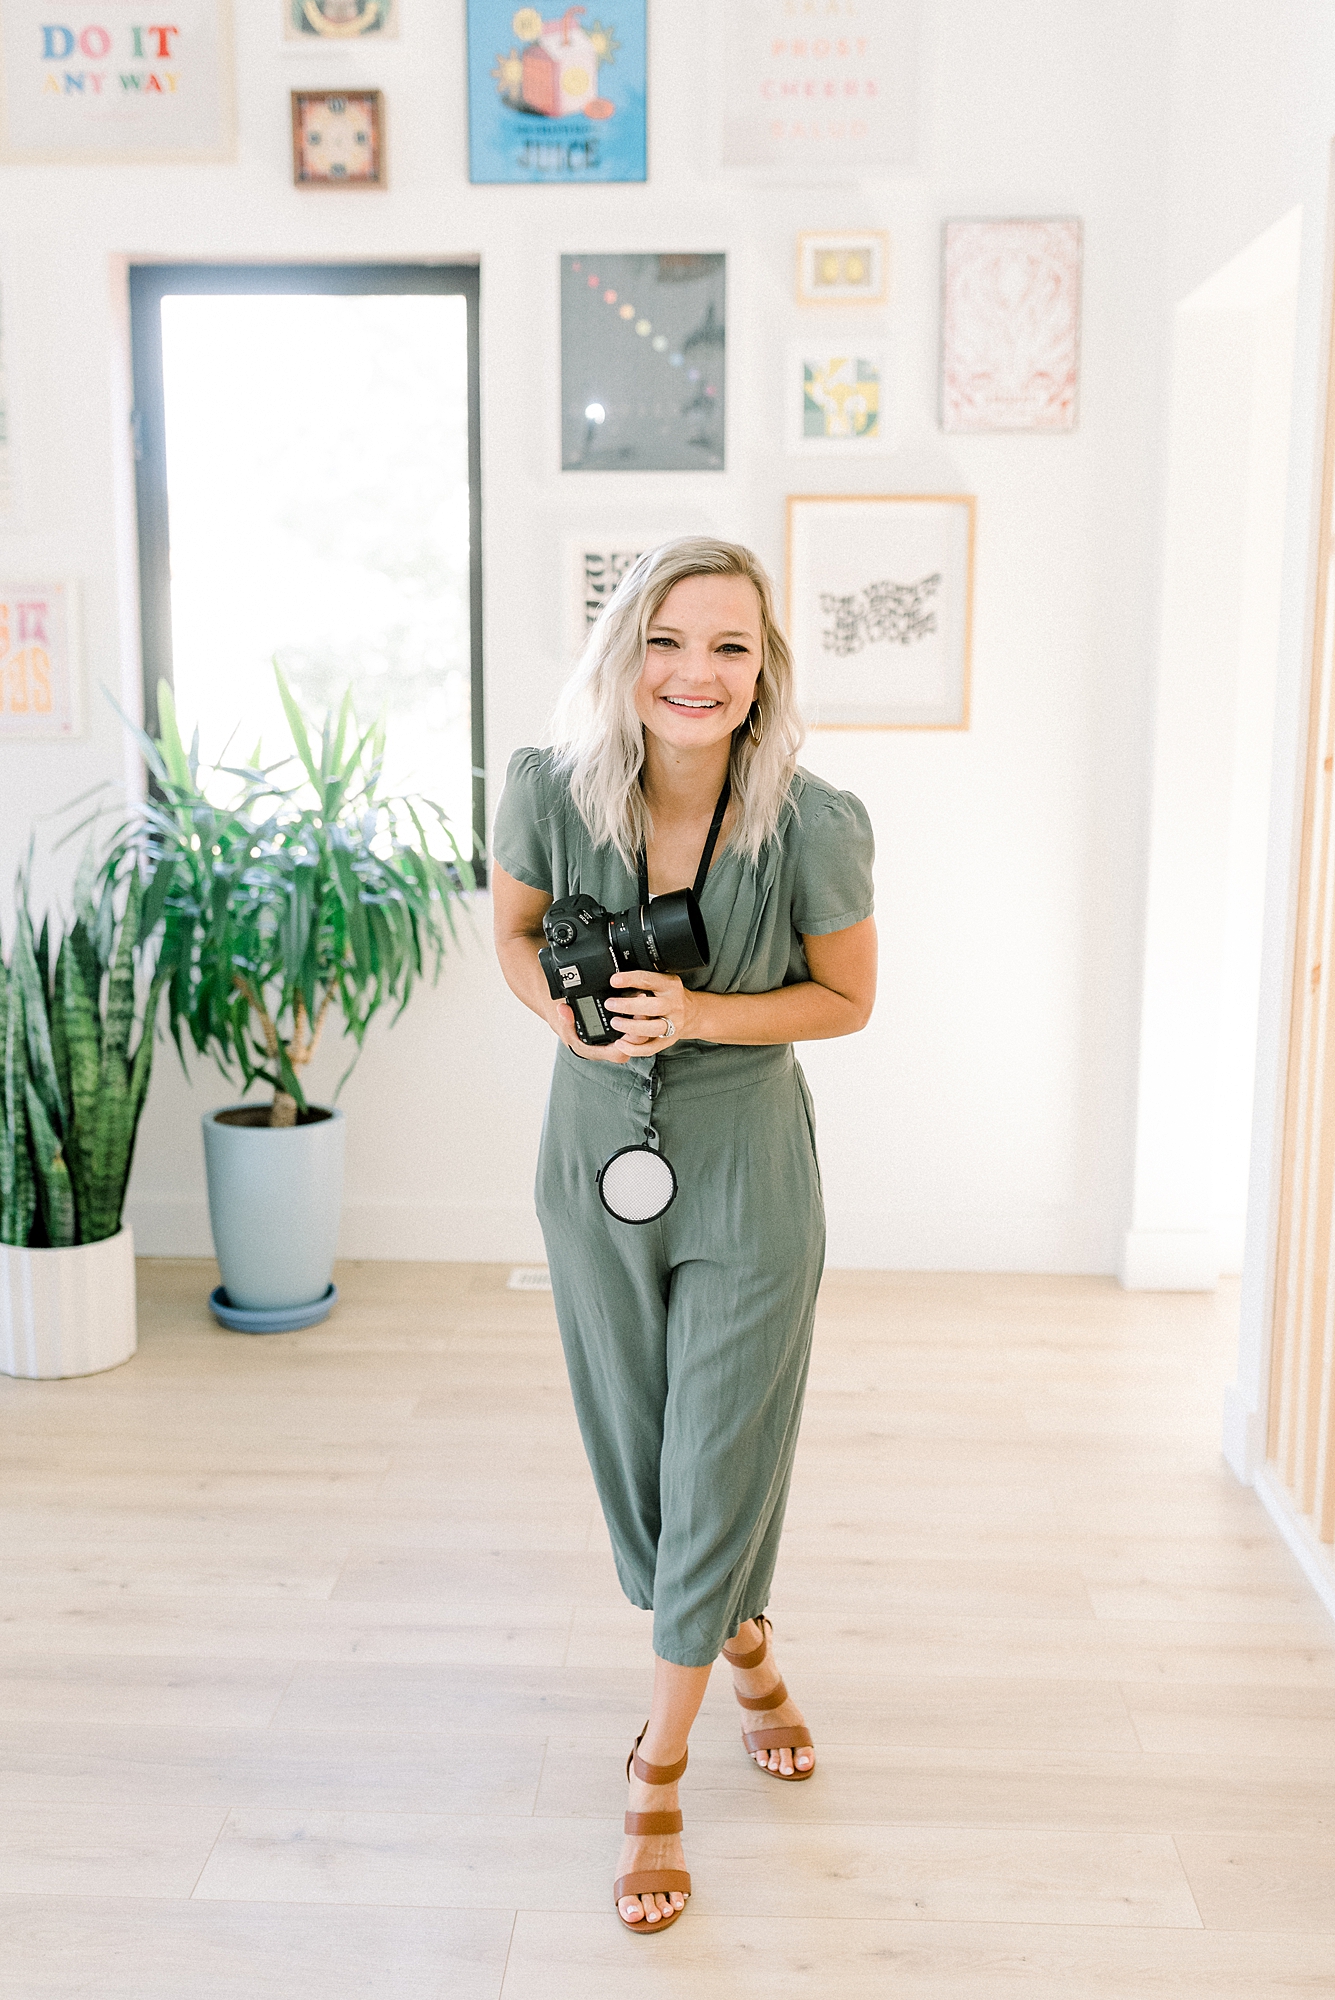 a_wedding_photographer_is_wearing_a_green_jumpsuit_and_is_walking_across_a_studio_holding_a_camera